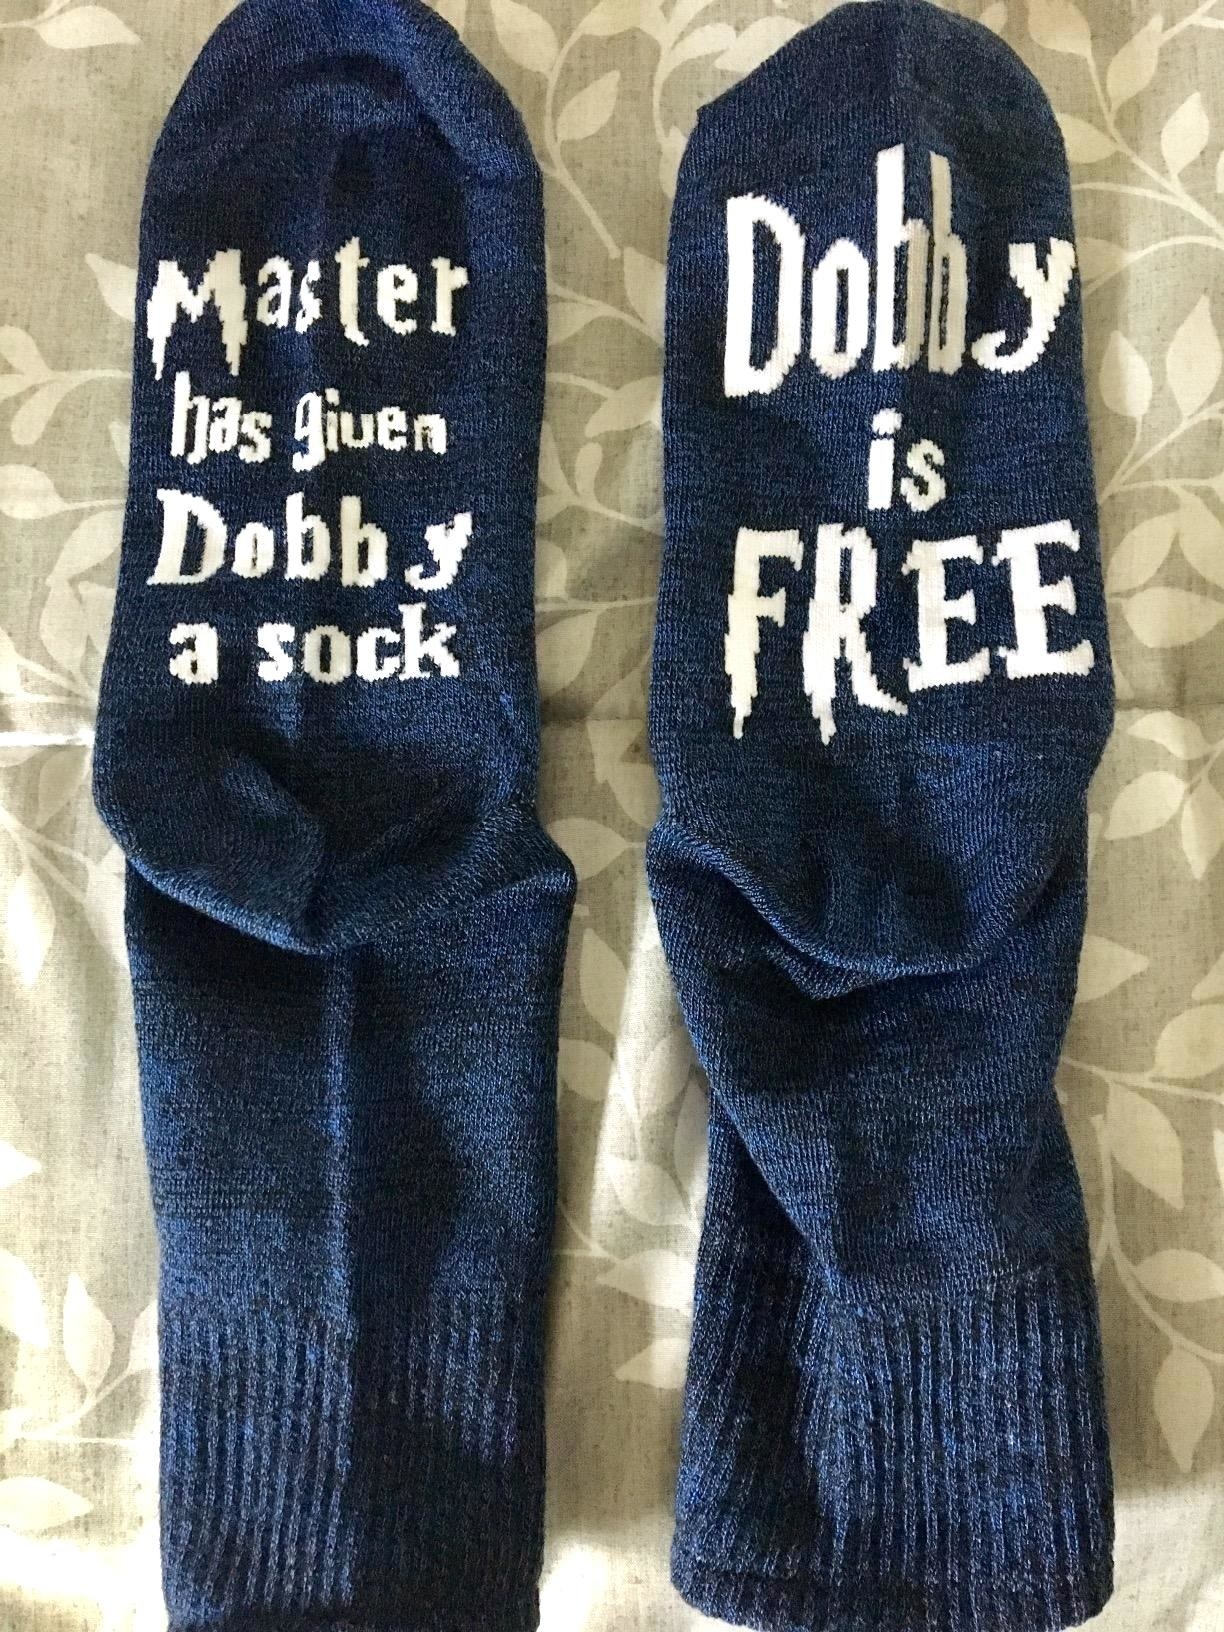 A reviewer&#x27;s pair of socks; one says &quot;Master has given Dobby a sock&quot; and the other &quot;Dobby is FREE&quot;, both in the Harry Potter font